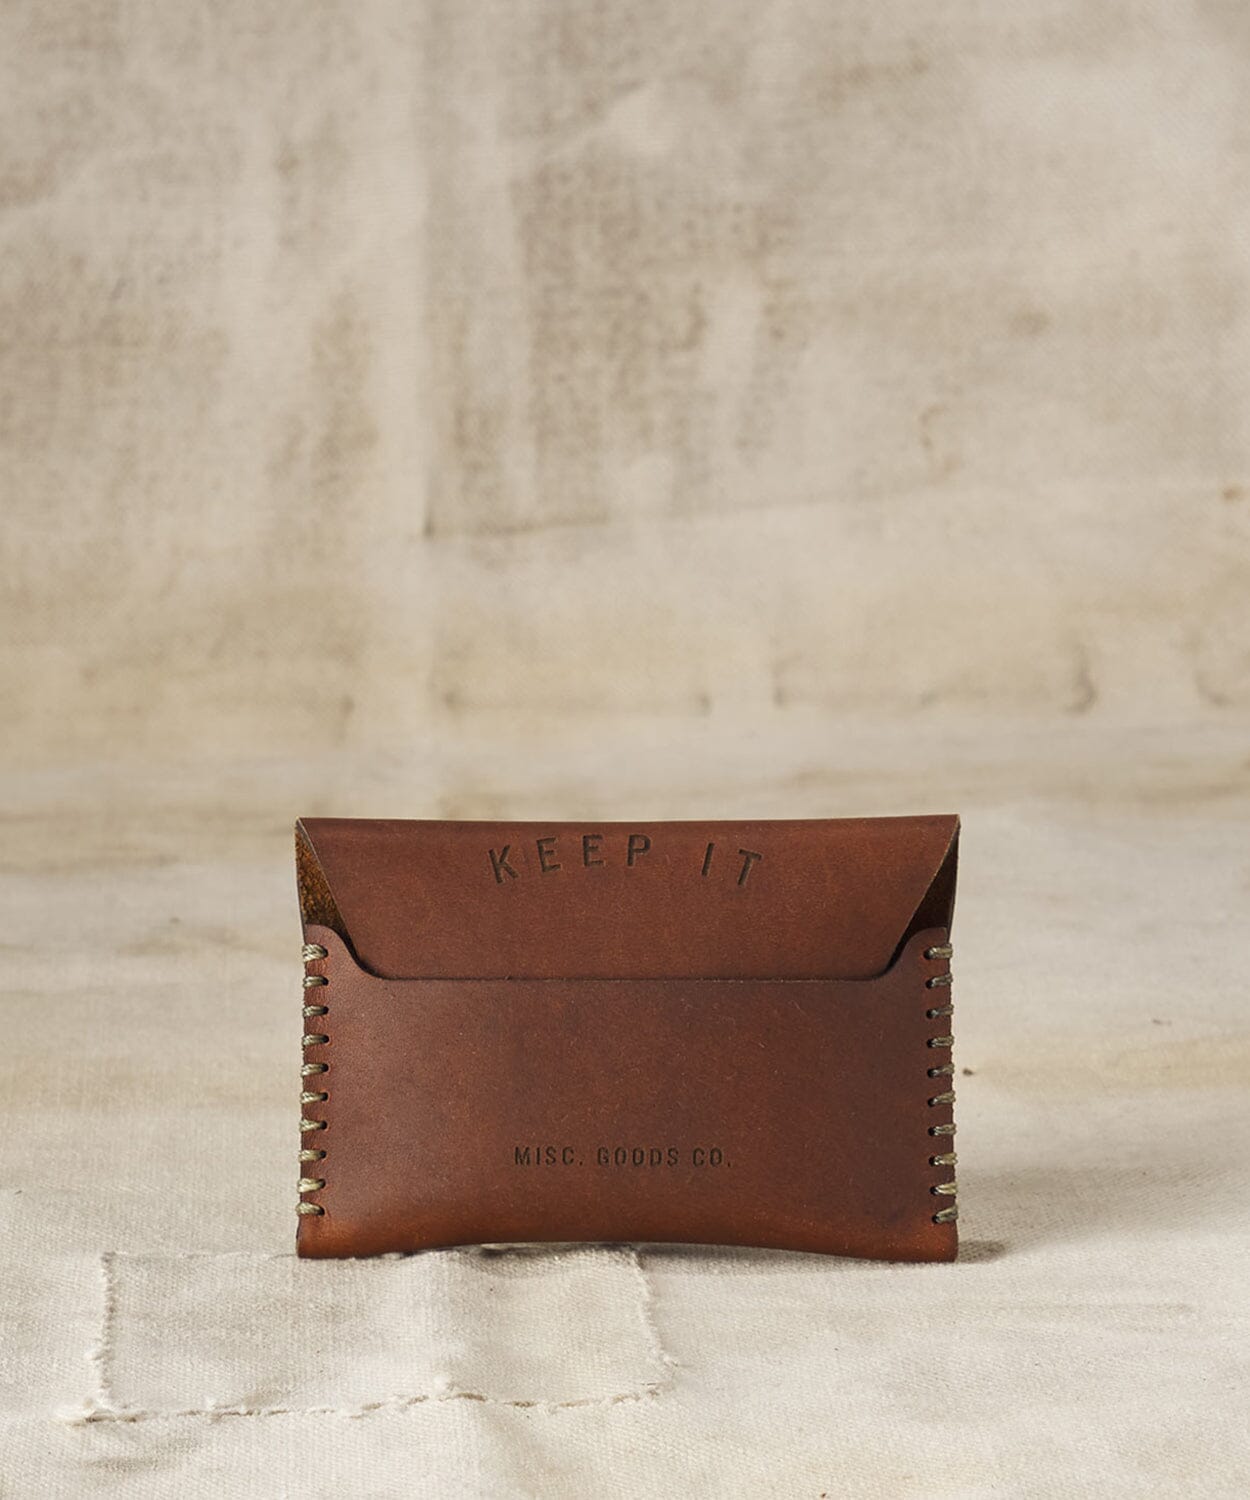 Leather Wallet Accessories Misc. Goods Co. Saddle 